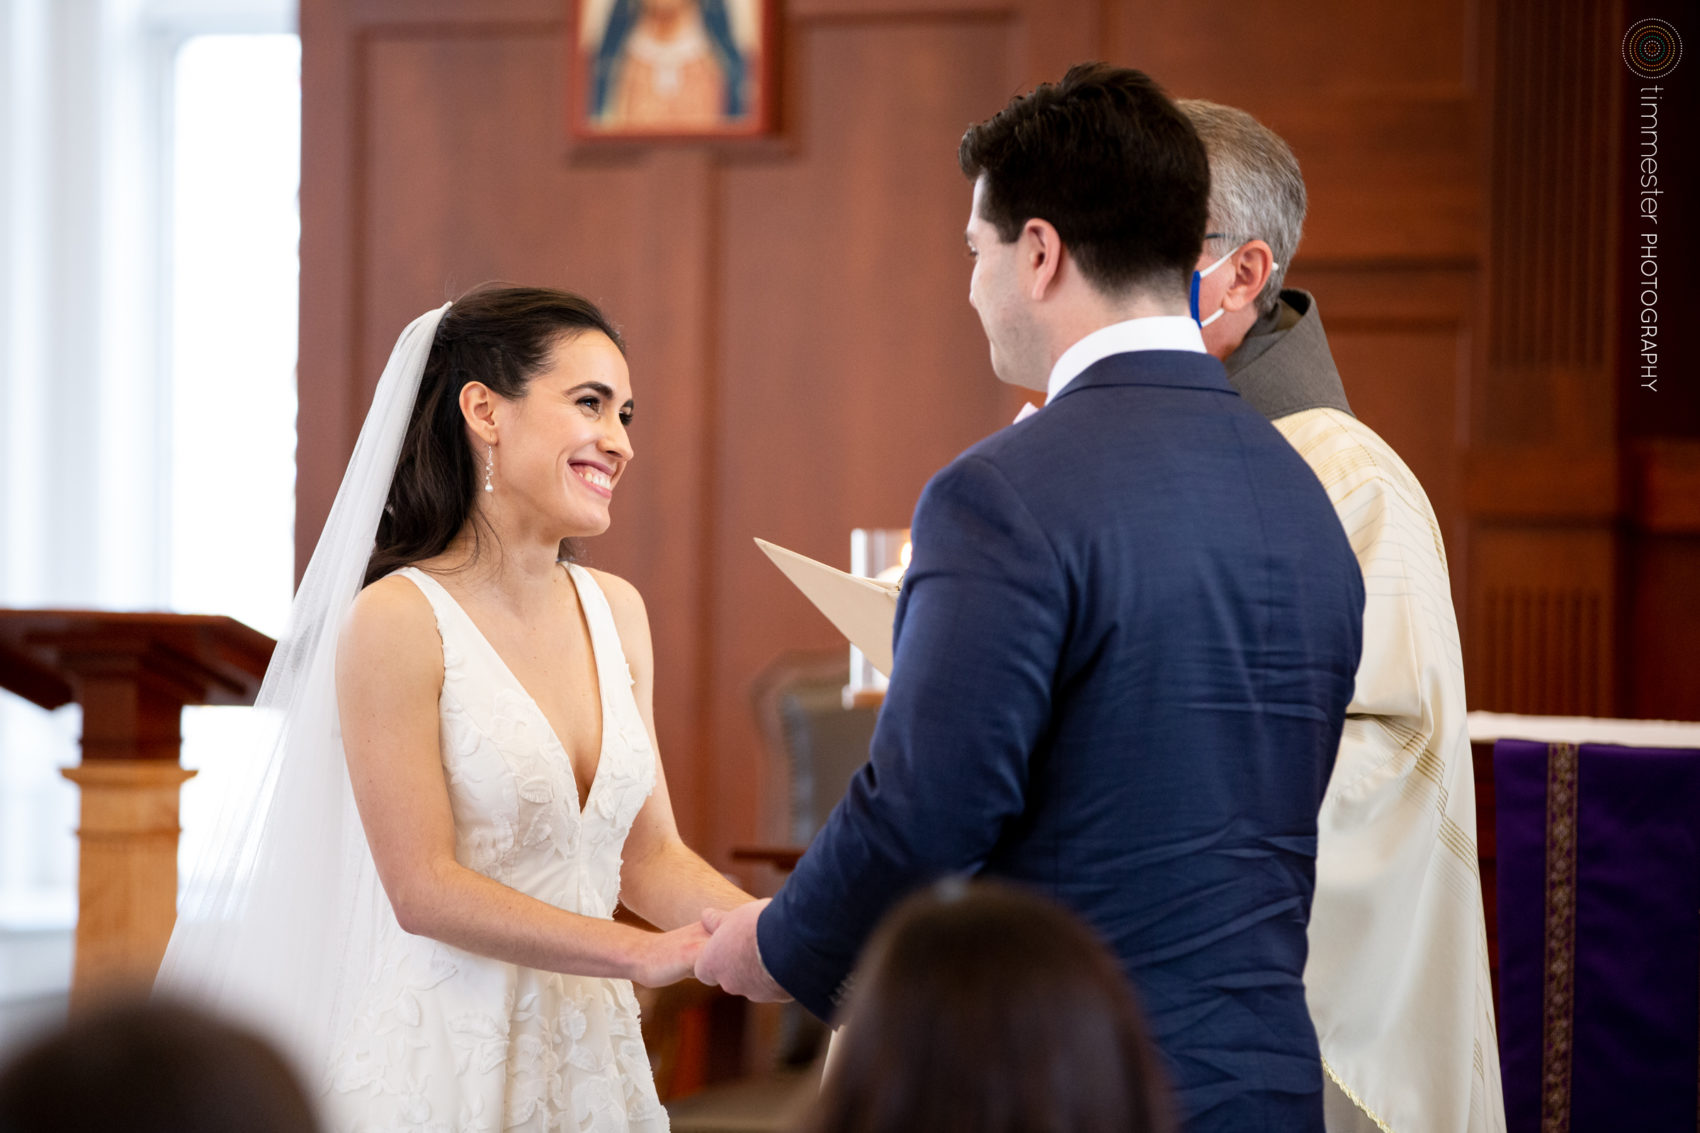 Wedding ceremony vows in Chapel Hill, NC